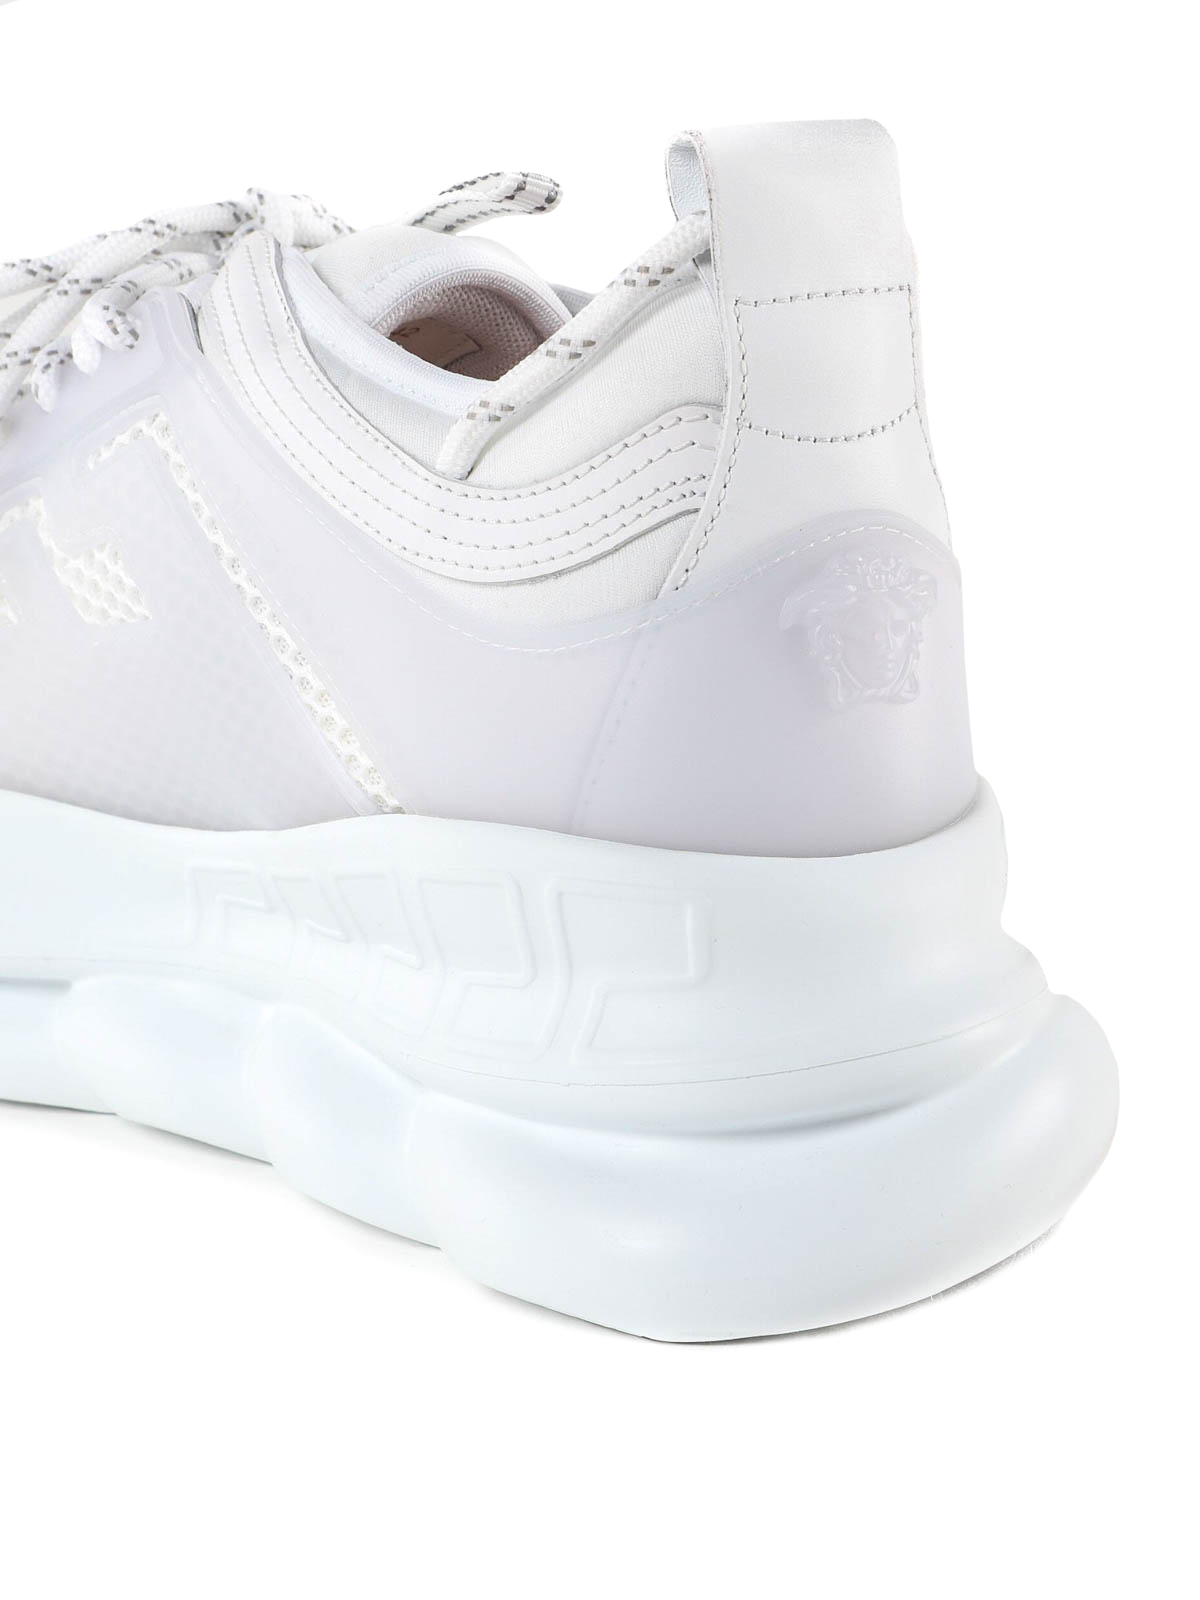 Trainers Versace - Chain Reaction white chunky sneakers - DSU7071ED7CTGD01